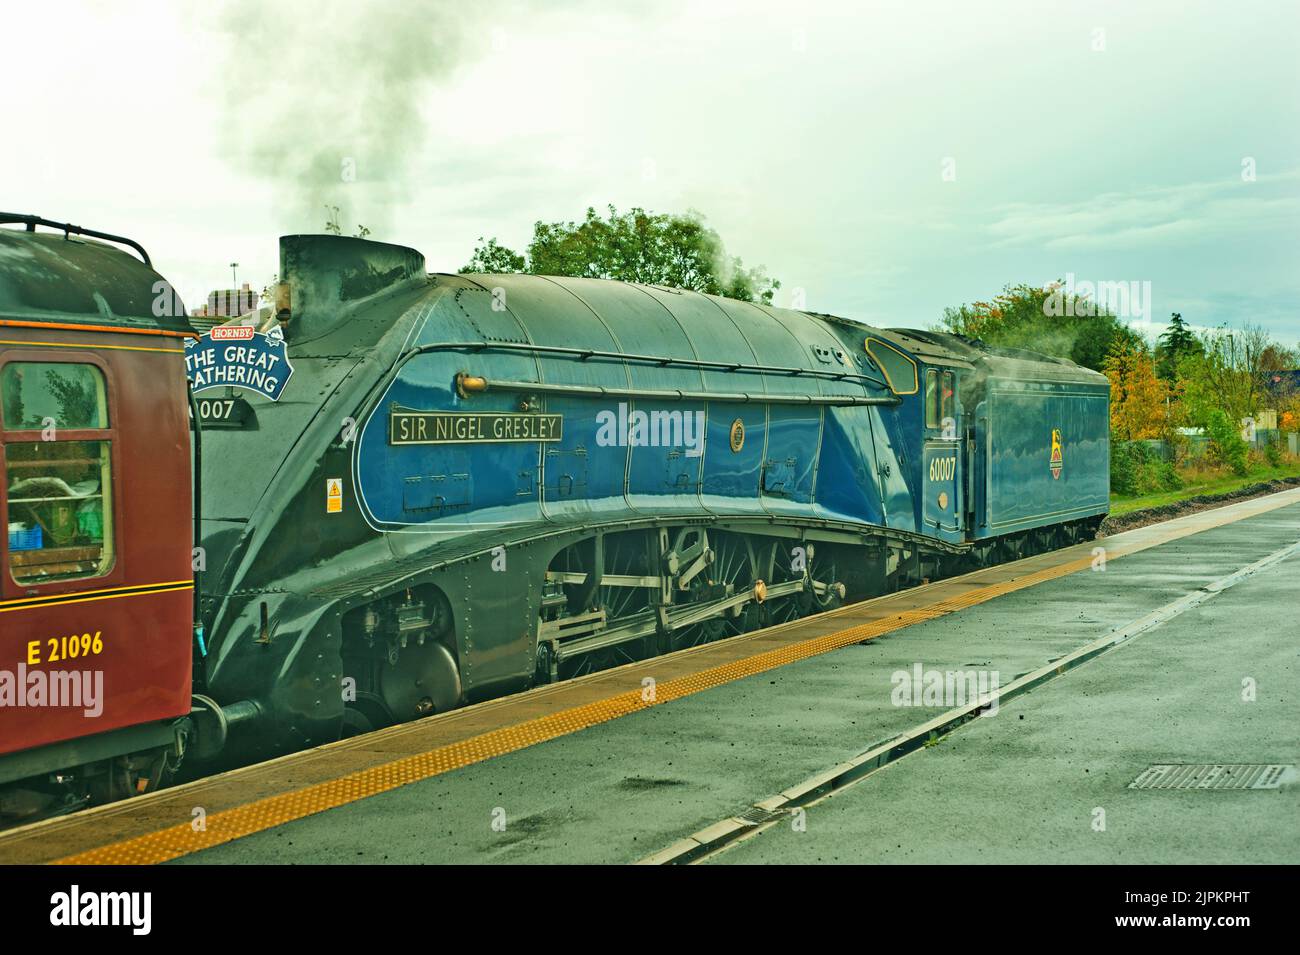 A4 Pacific No 60007 Sir Nigel Gresley in Eaglescliffe, Stockton on Tees, Cleveland, England Stockfoto